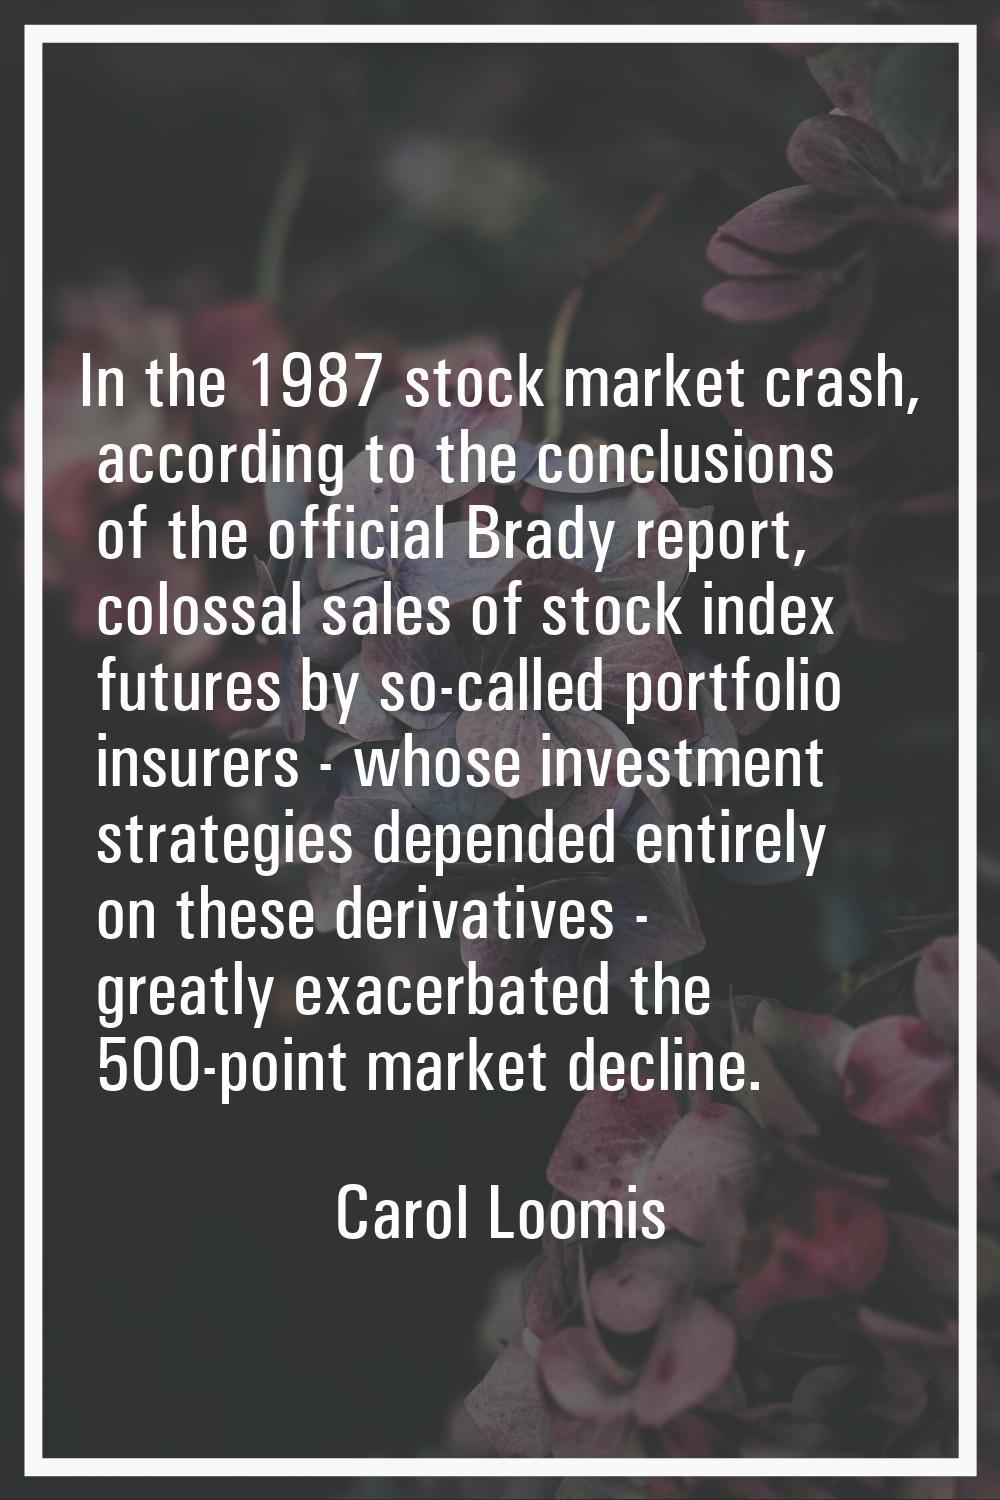 In the 1987 stock market crash, according to the conclusions of the official Brady report, colossal